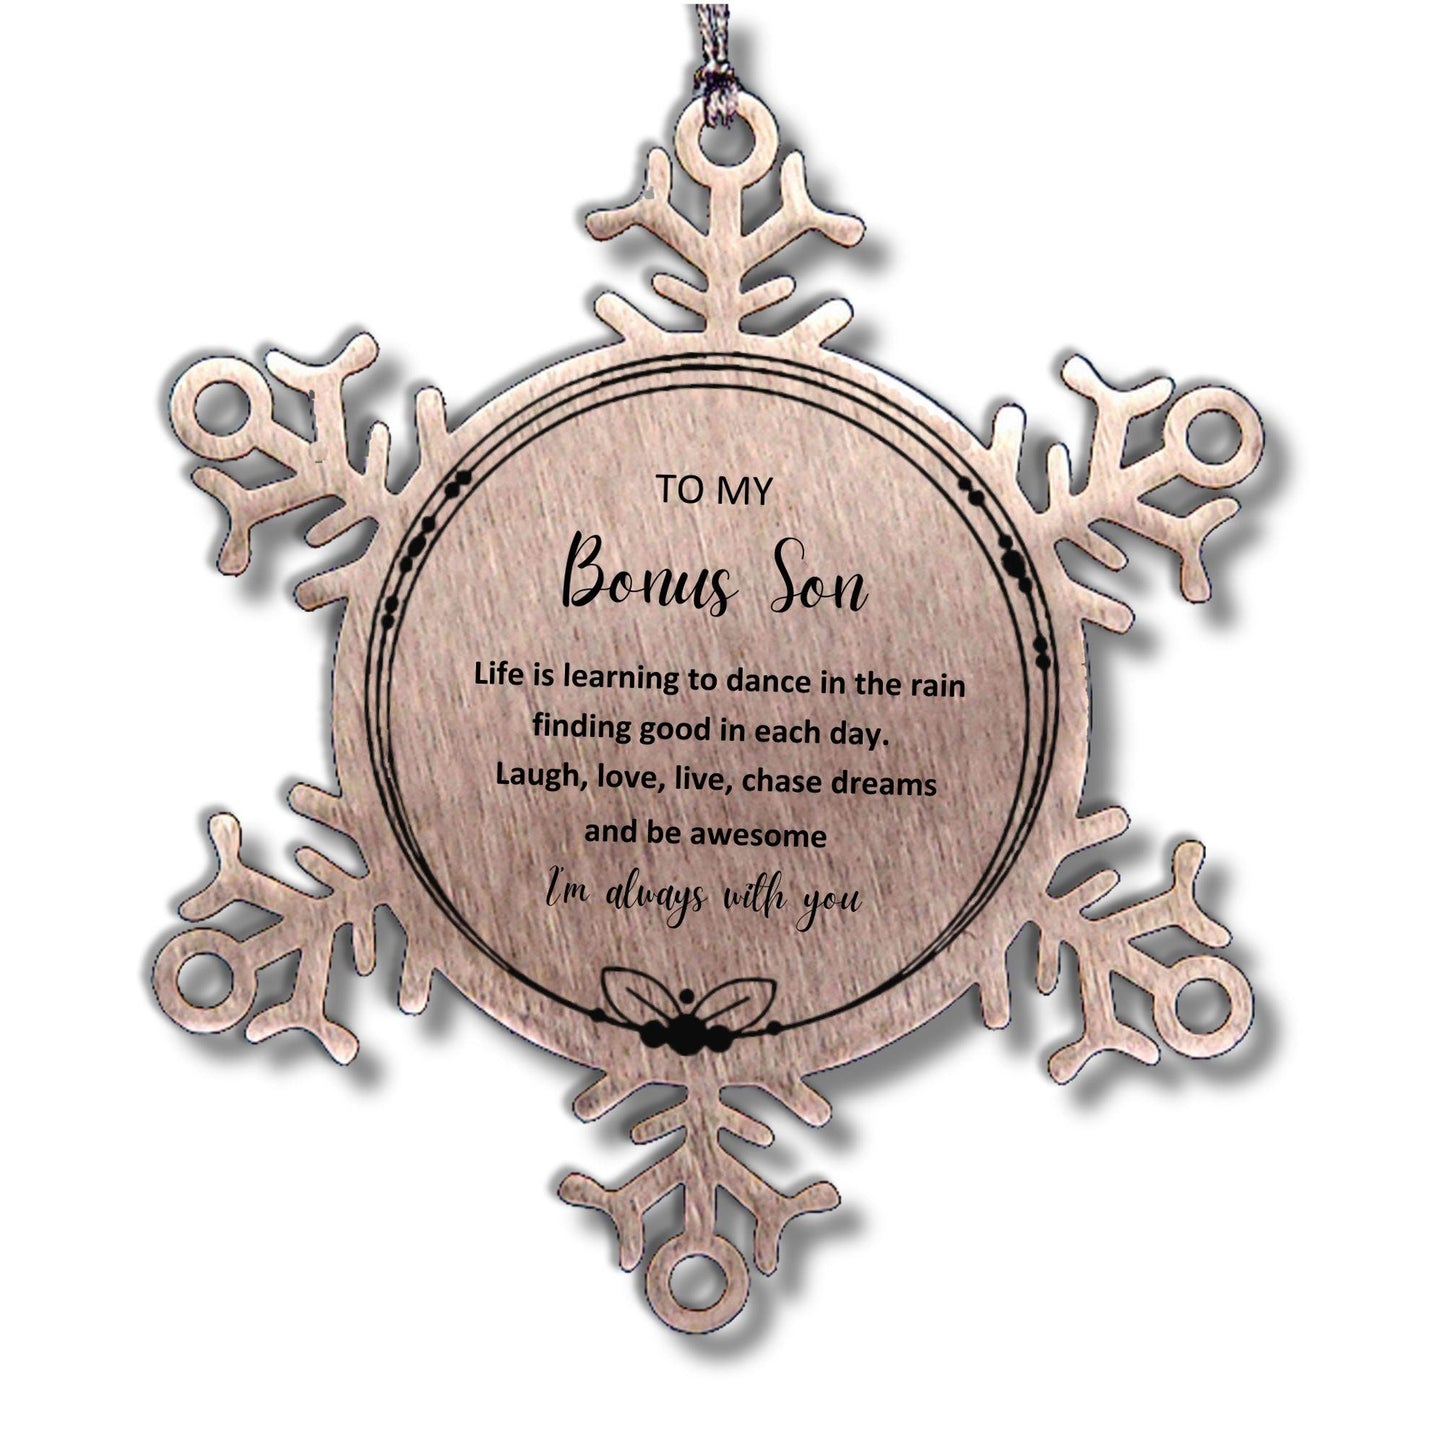 Bonus Son Christmas Snowflake Engraved Ornament Motivational Birthday Gifts - Life is learning to dance in the rain, finding good in each day. I'm always with you - Mallard Moon Gift Shop